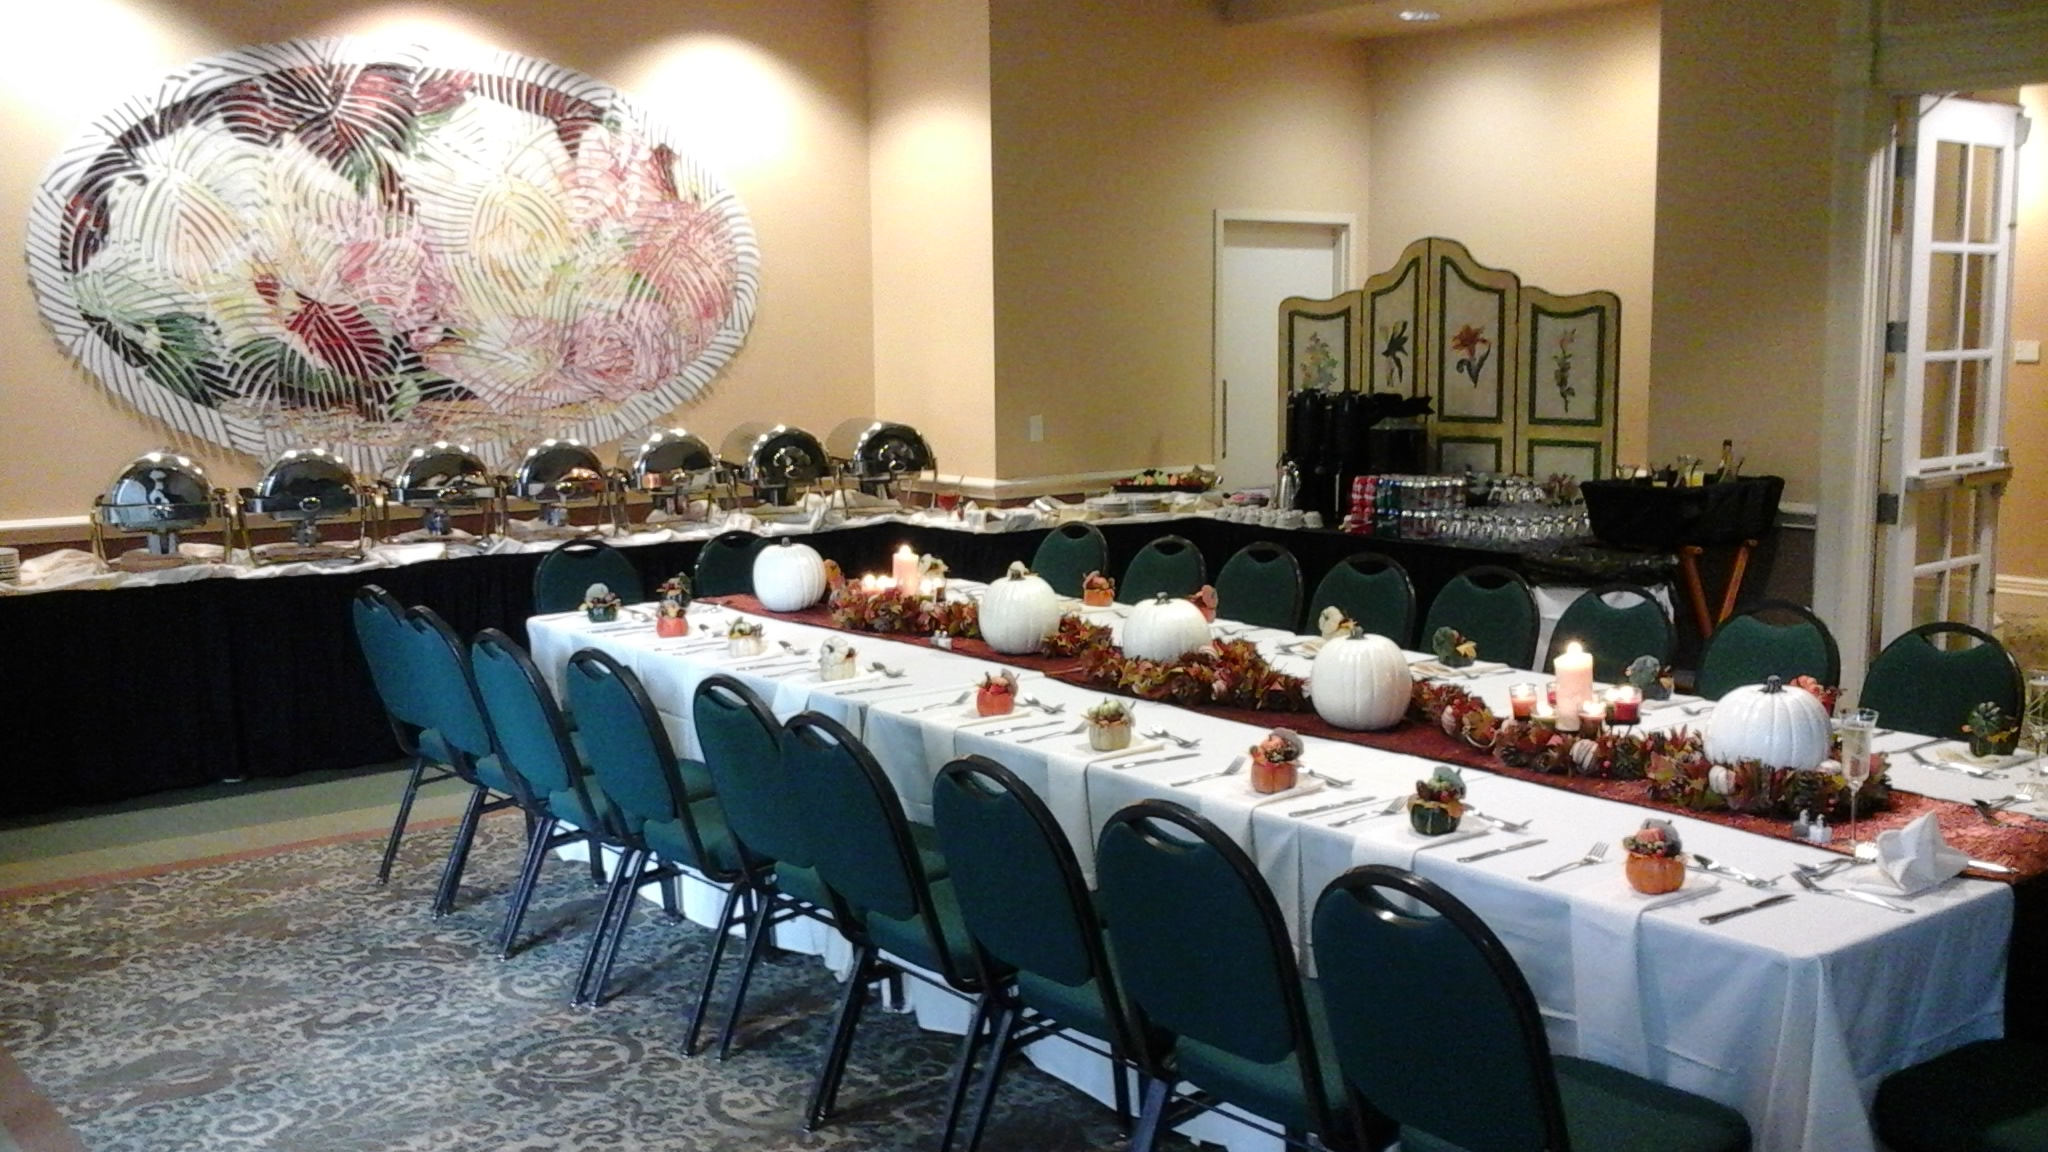 fall table decor and seating with buffet